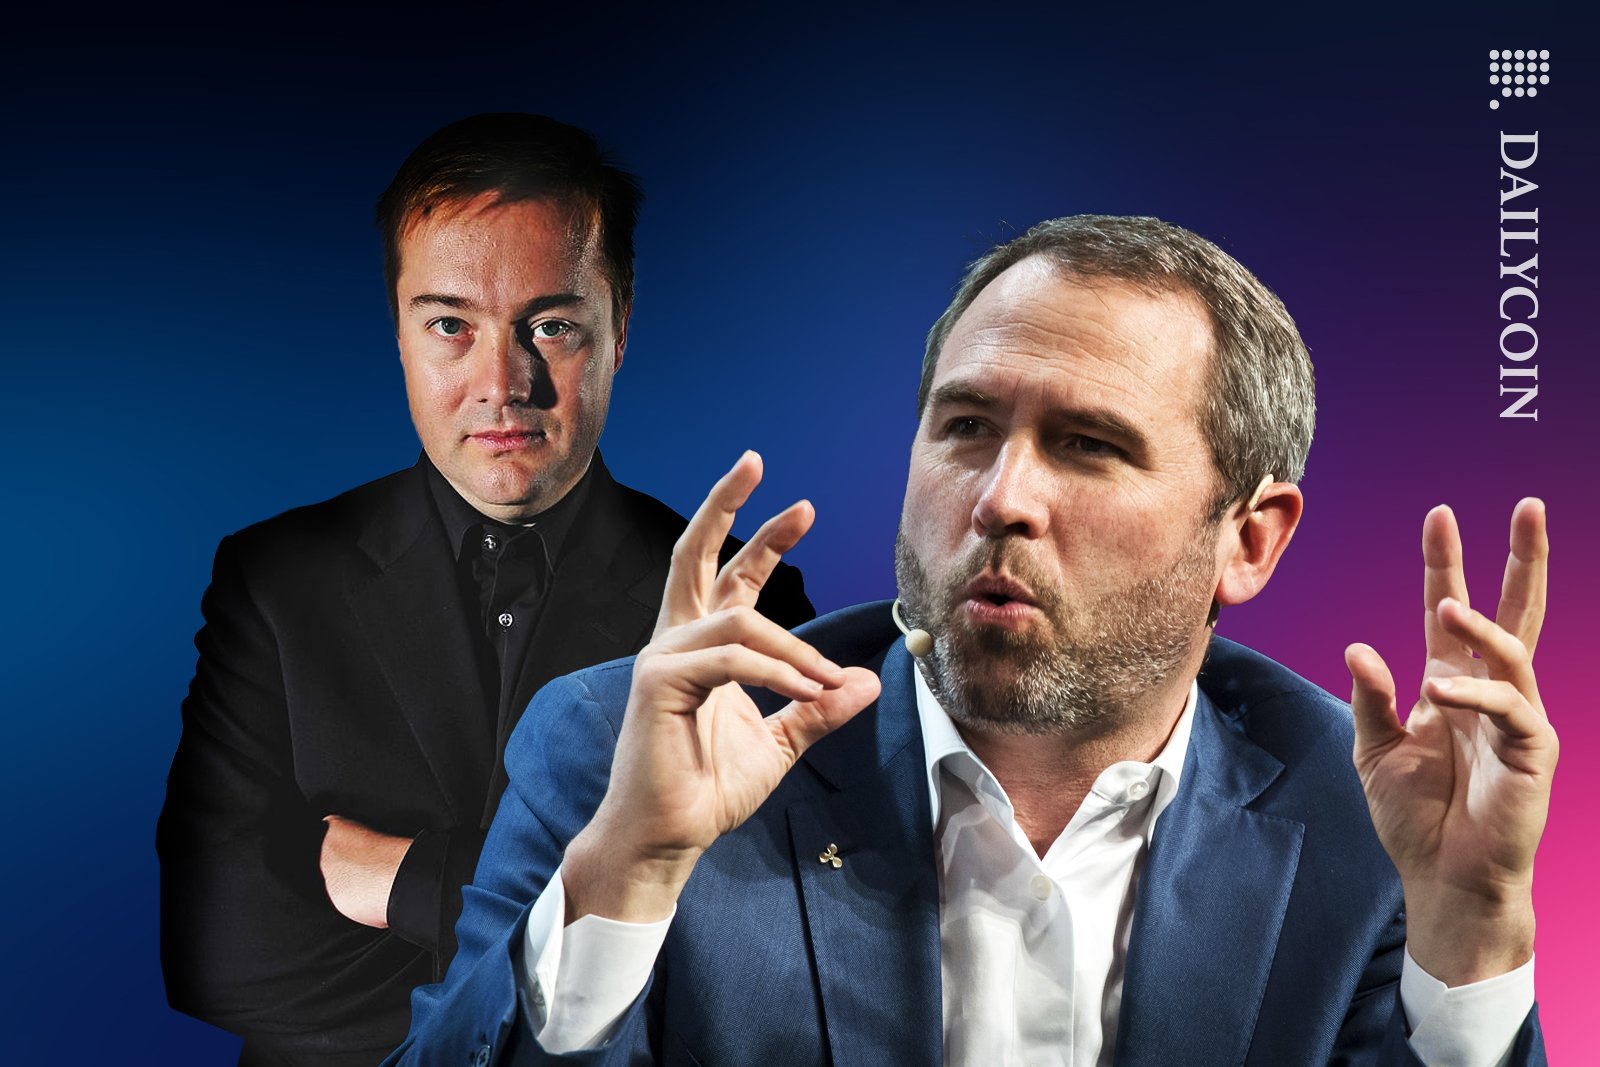 Brag Garlinghouse showing air quote fingers. Jason Calacanis standing in the background with his arms crossed.